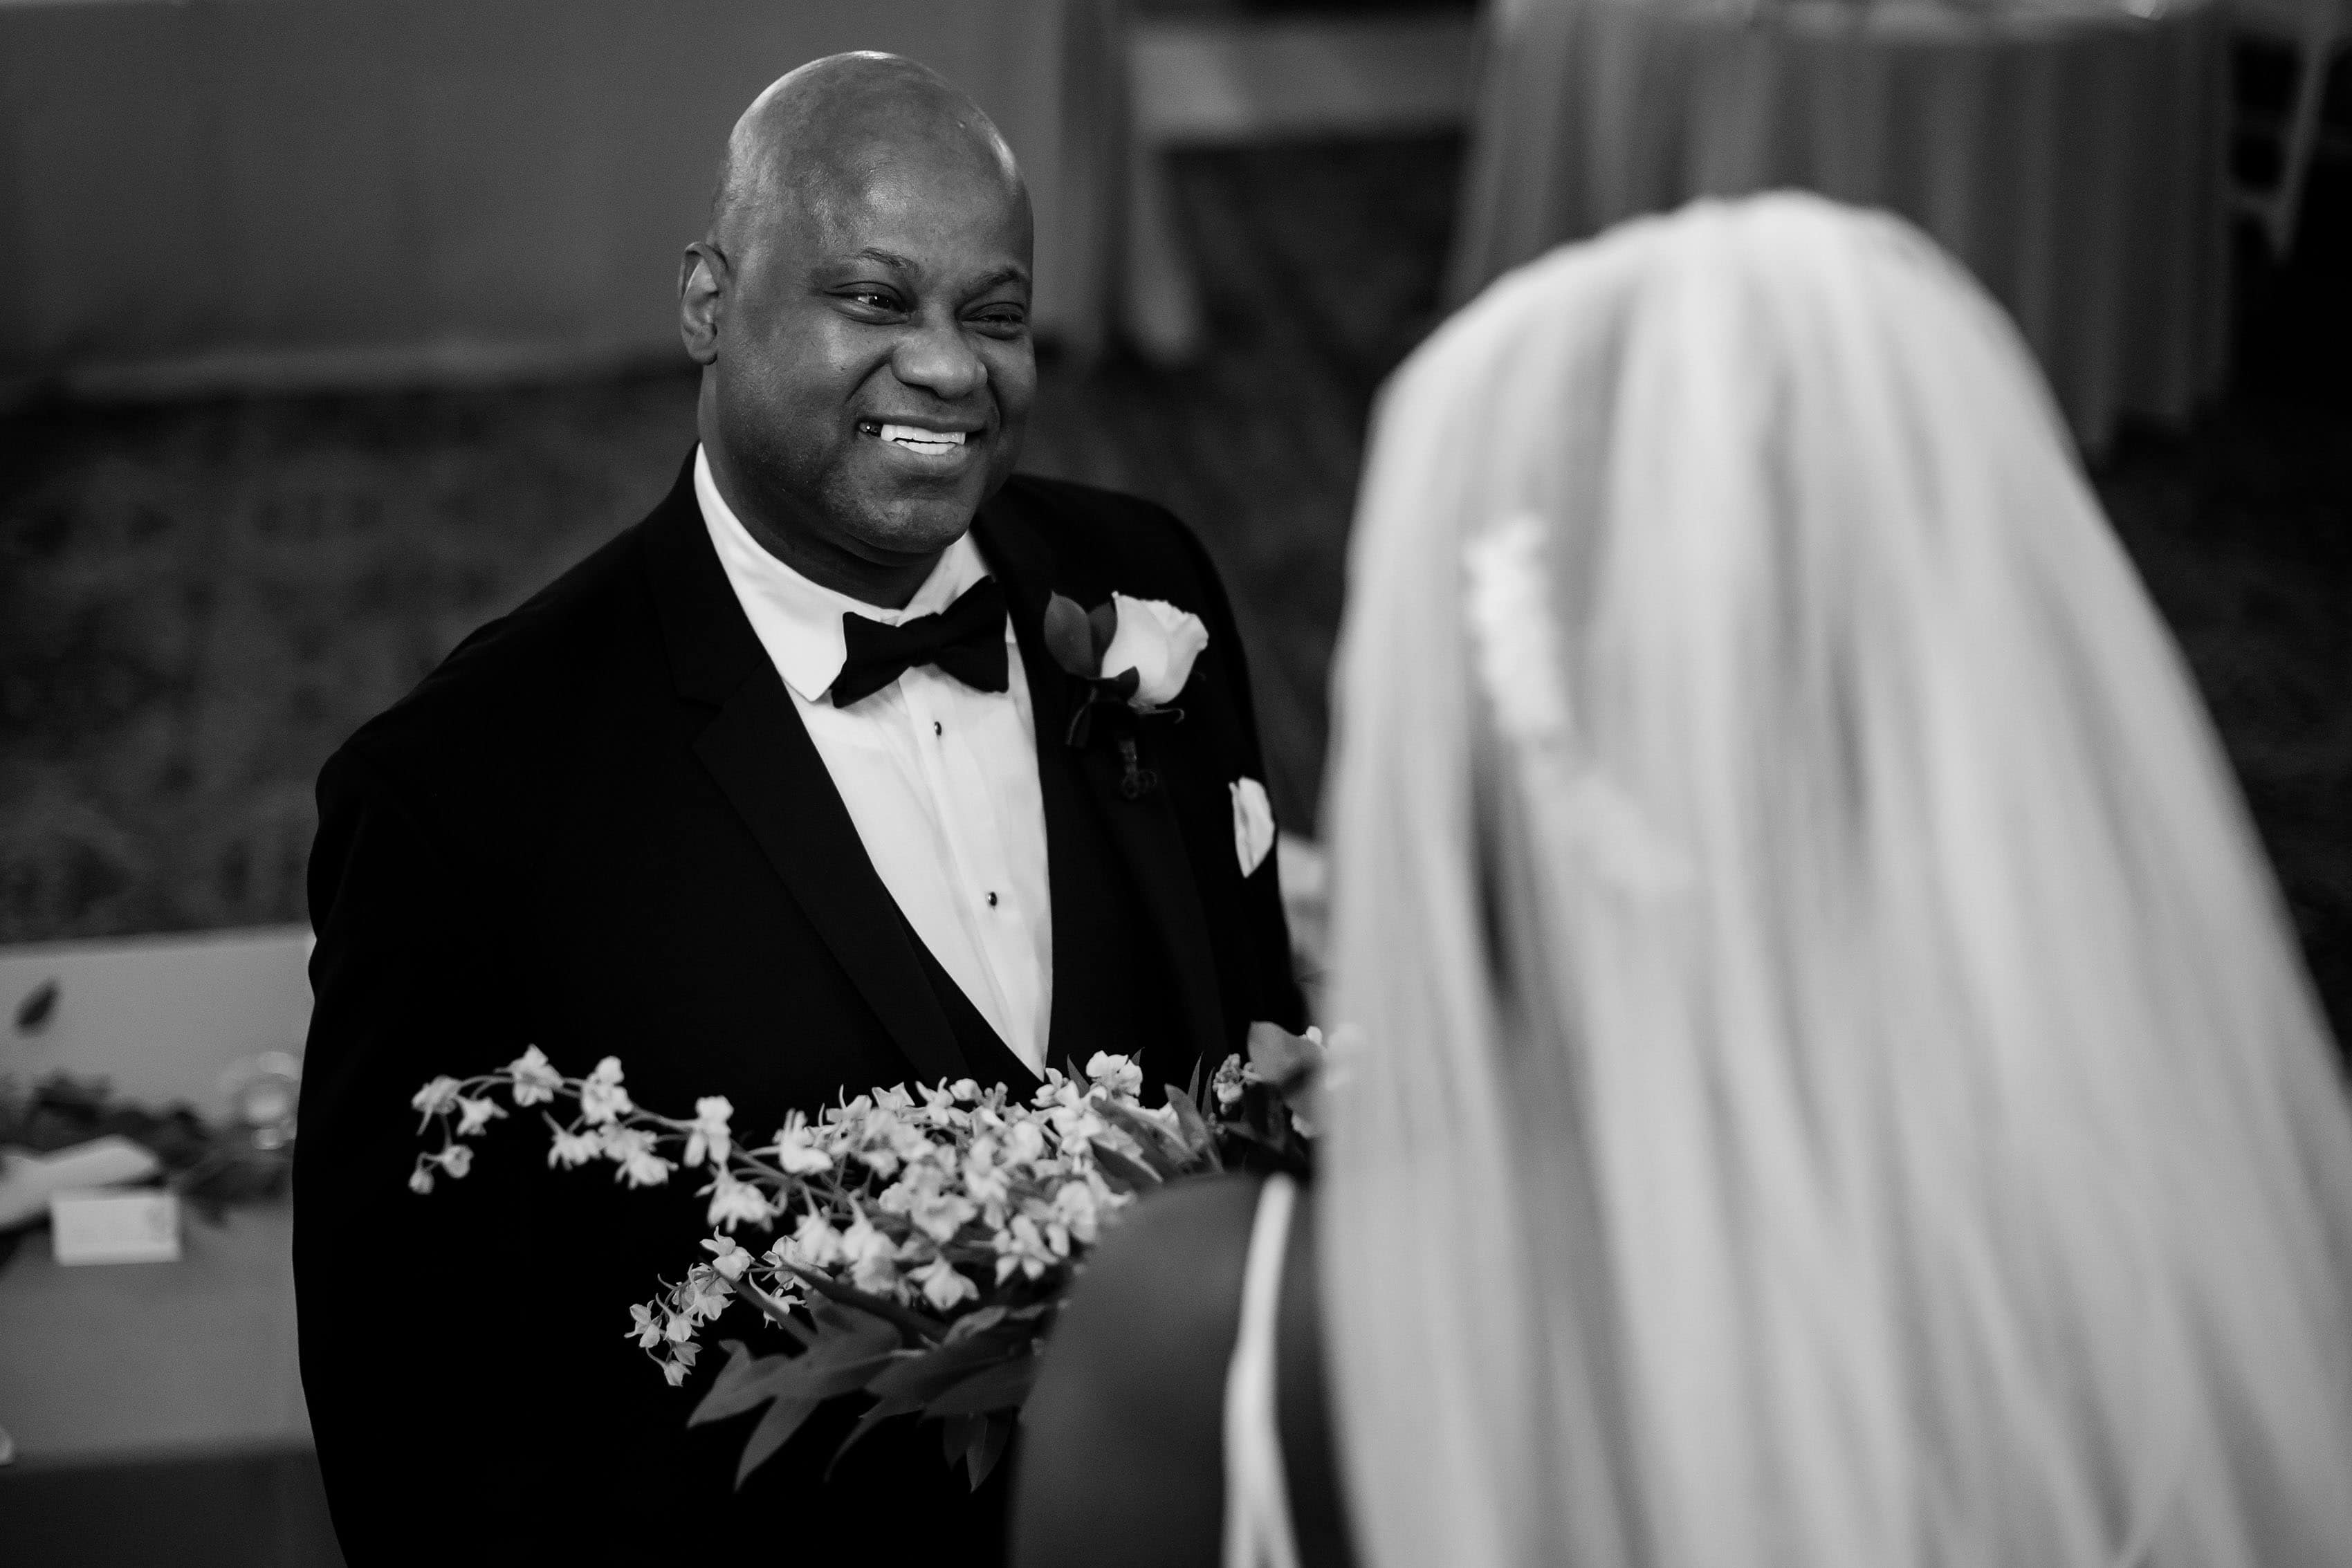 The bride’s father sees her for the first time on the wedding day